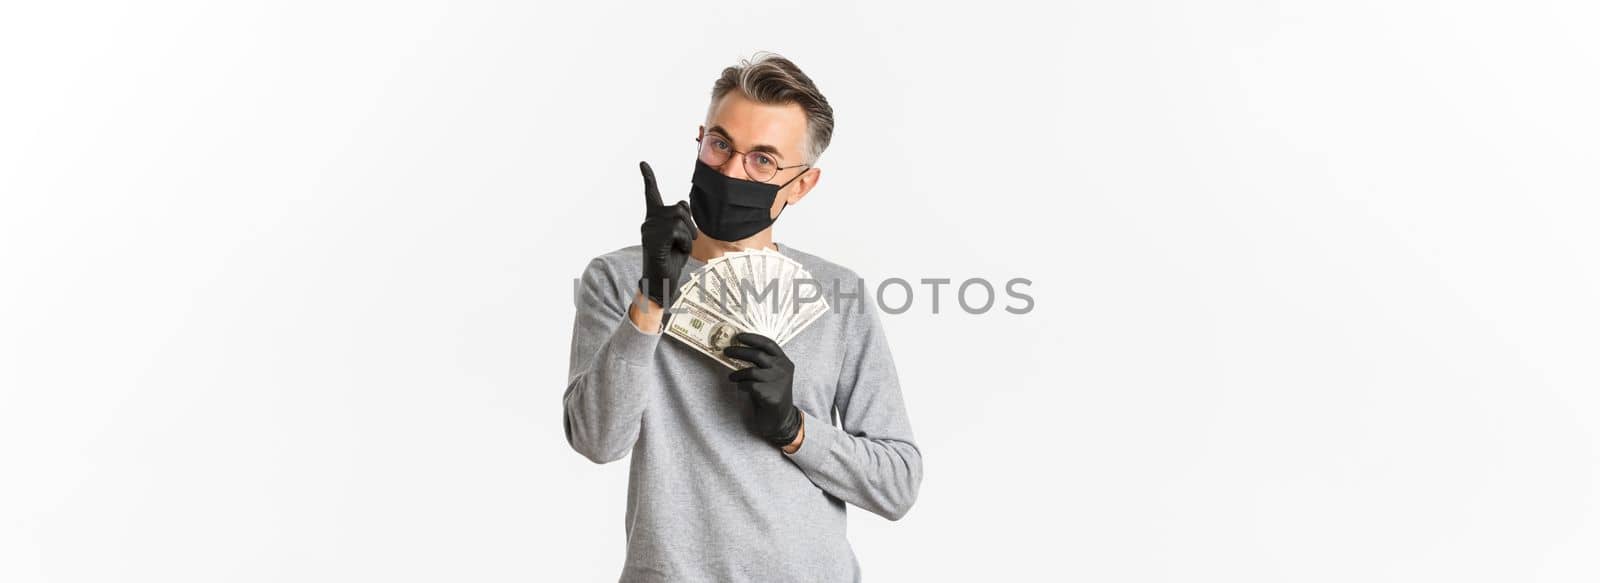 Concept of covid-19, social distancing and lifestyle. Portrait of lucky middle-aged man in medical mask, gloves and glasses, showing money and pointing finger up, smiling pleased.